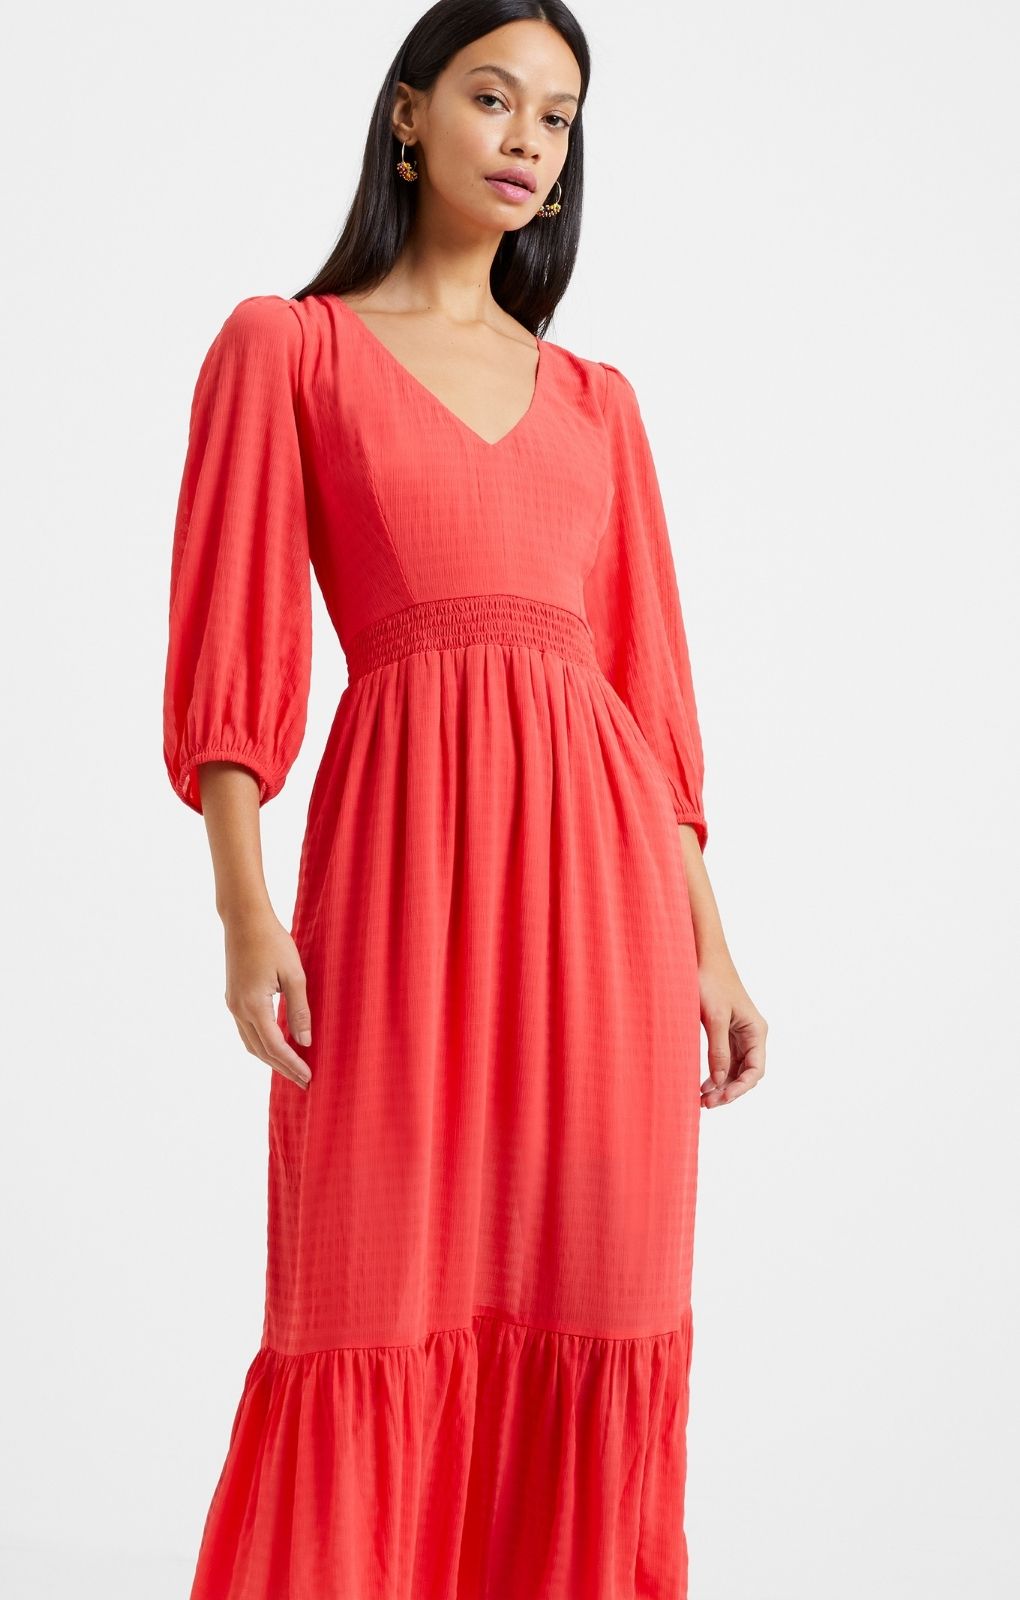 French Connection Cora Tiered Midi Dress in Bittersweet product image